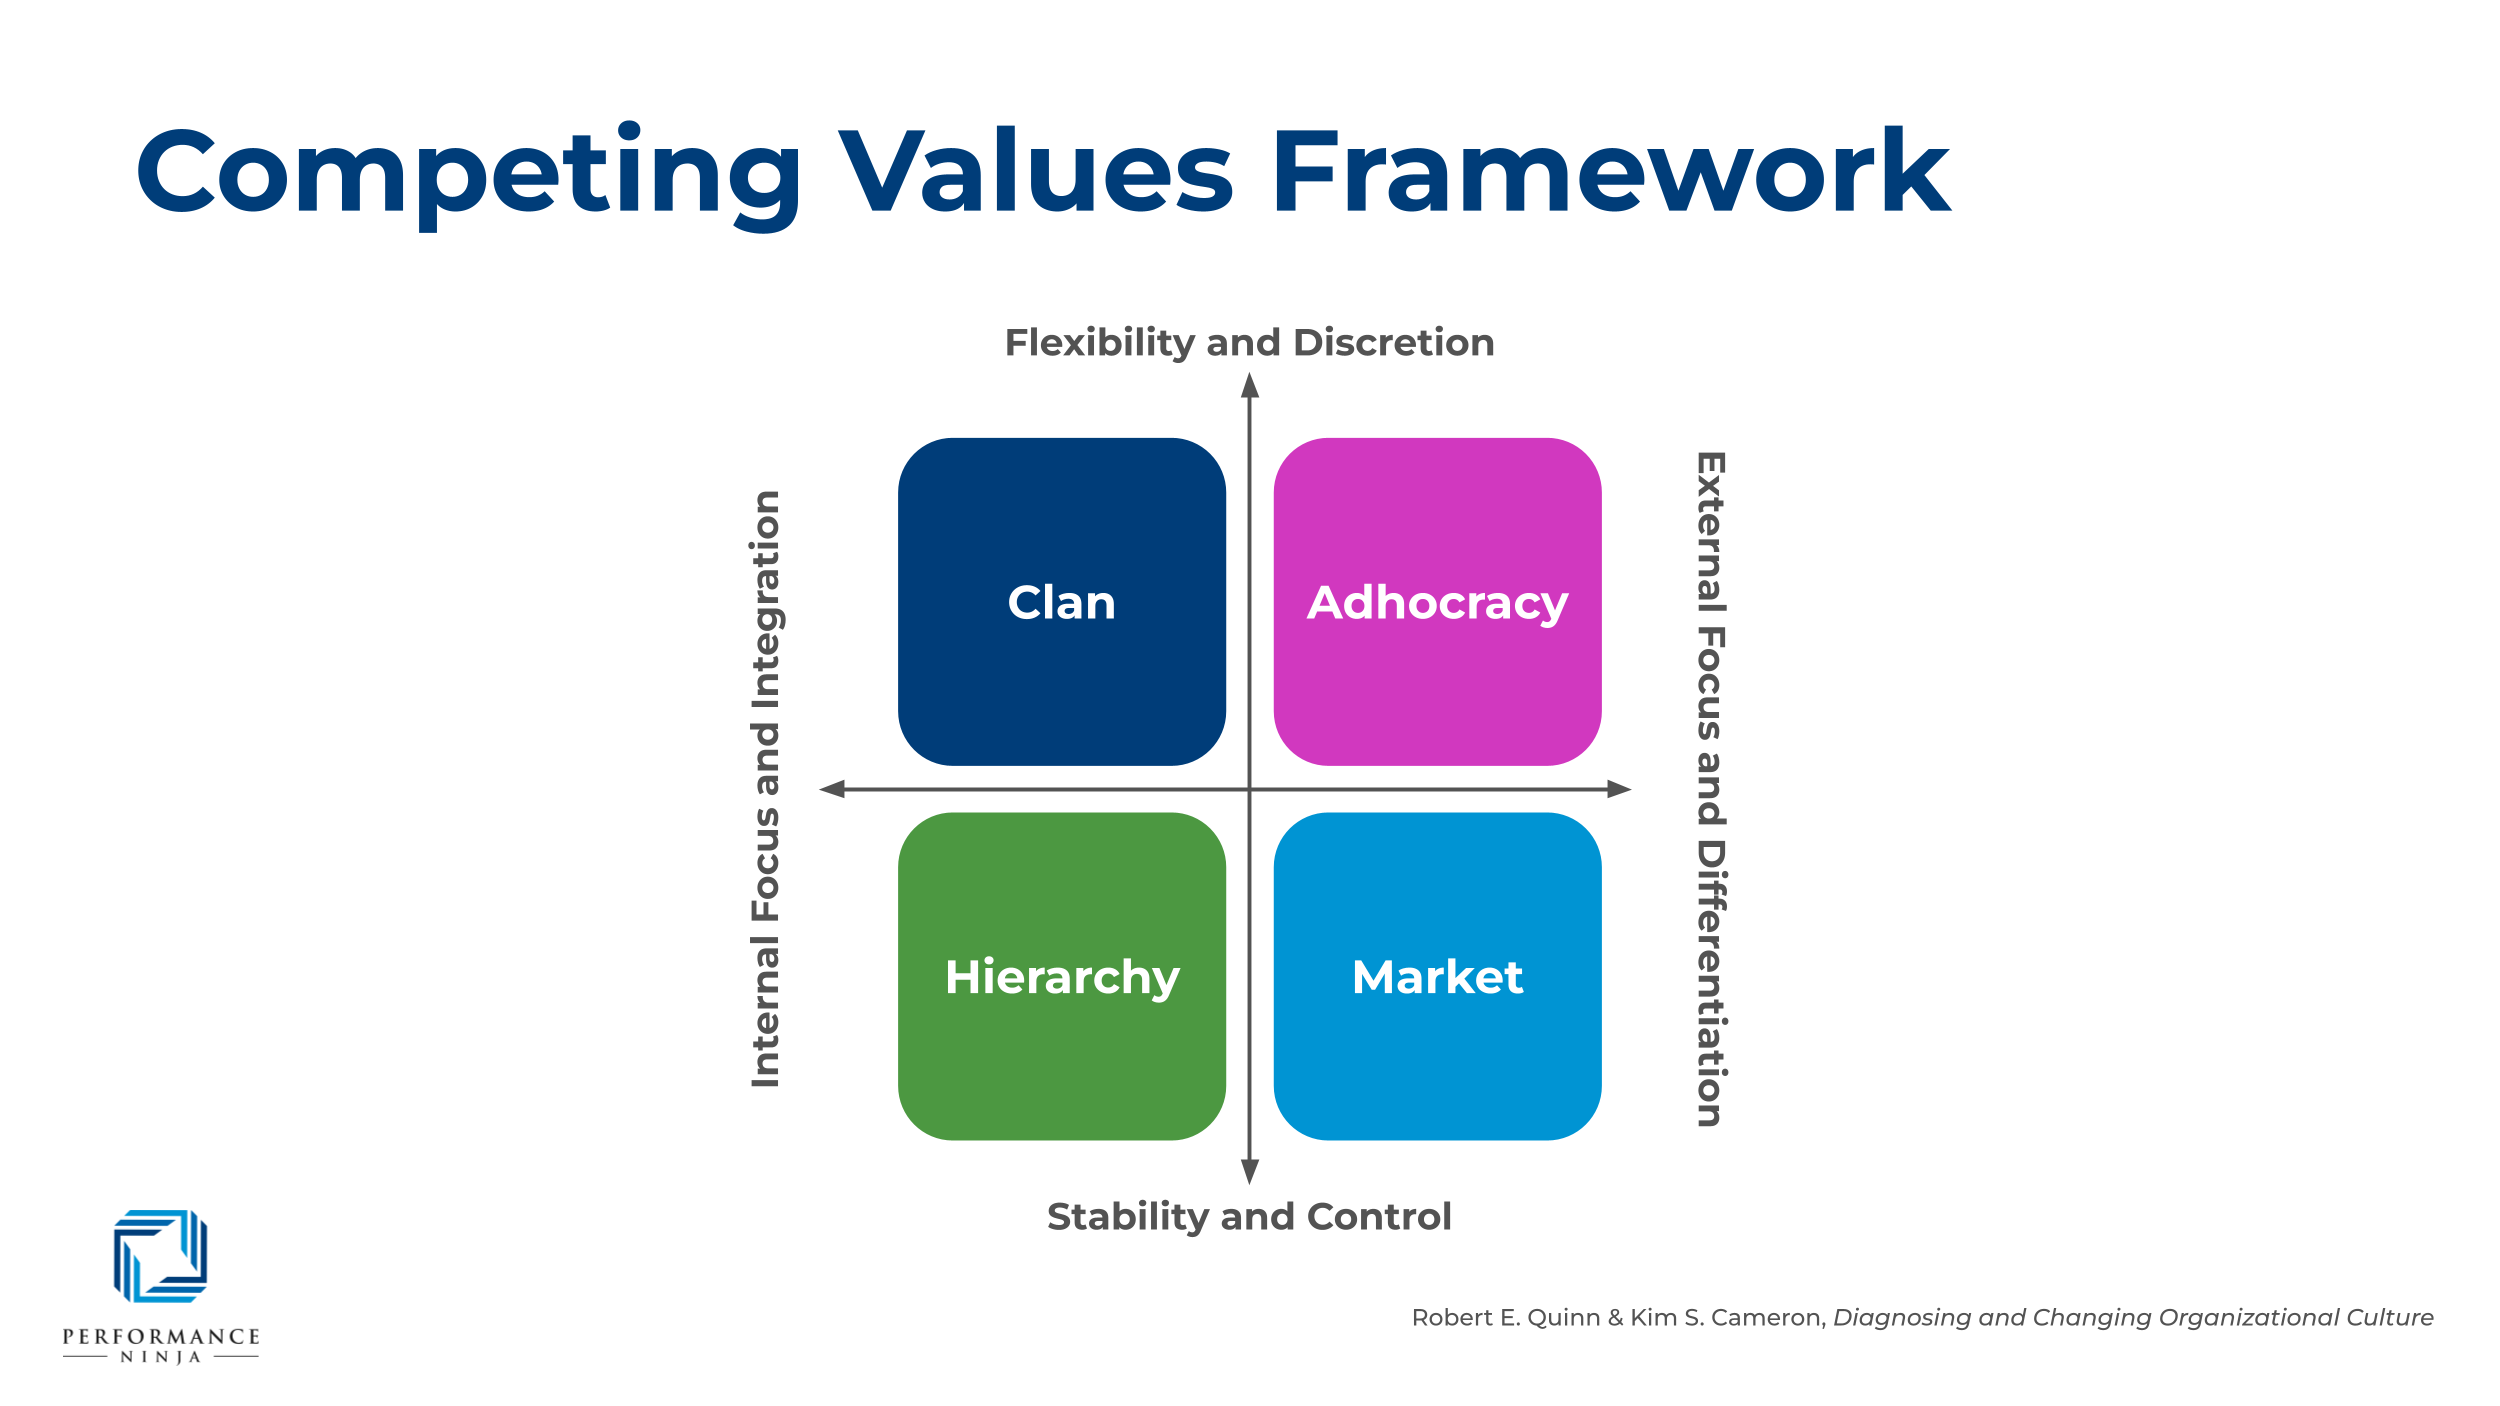 2 by 2 matrix of competing values, respresenting Flexibility and Discretion vs Stability and Control alongside Internal Focus and Integration vs External Focus and Differentiation to give four quadrants of Clan, Hierarchy, Adhocracy and Market